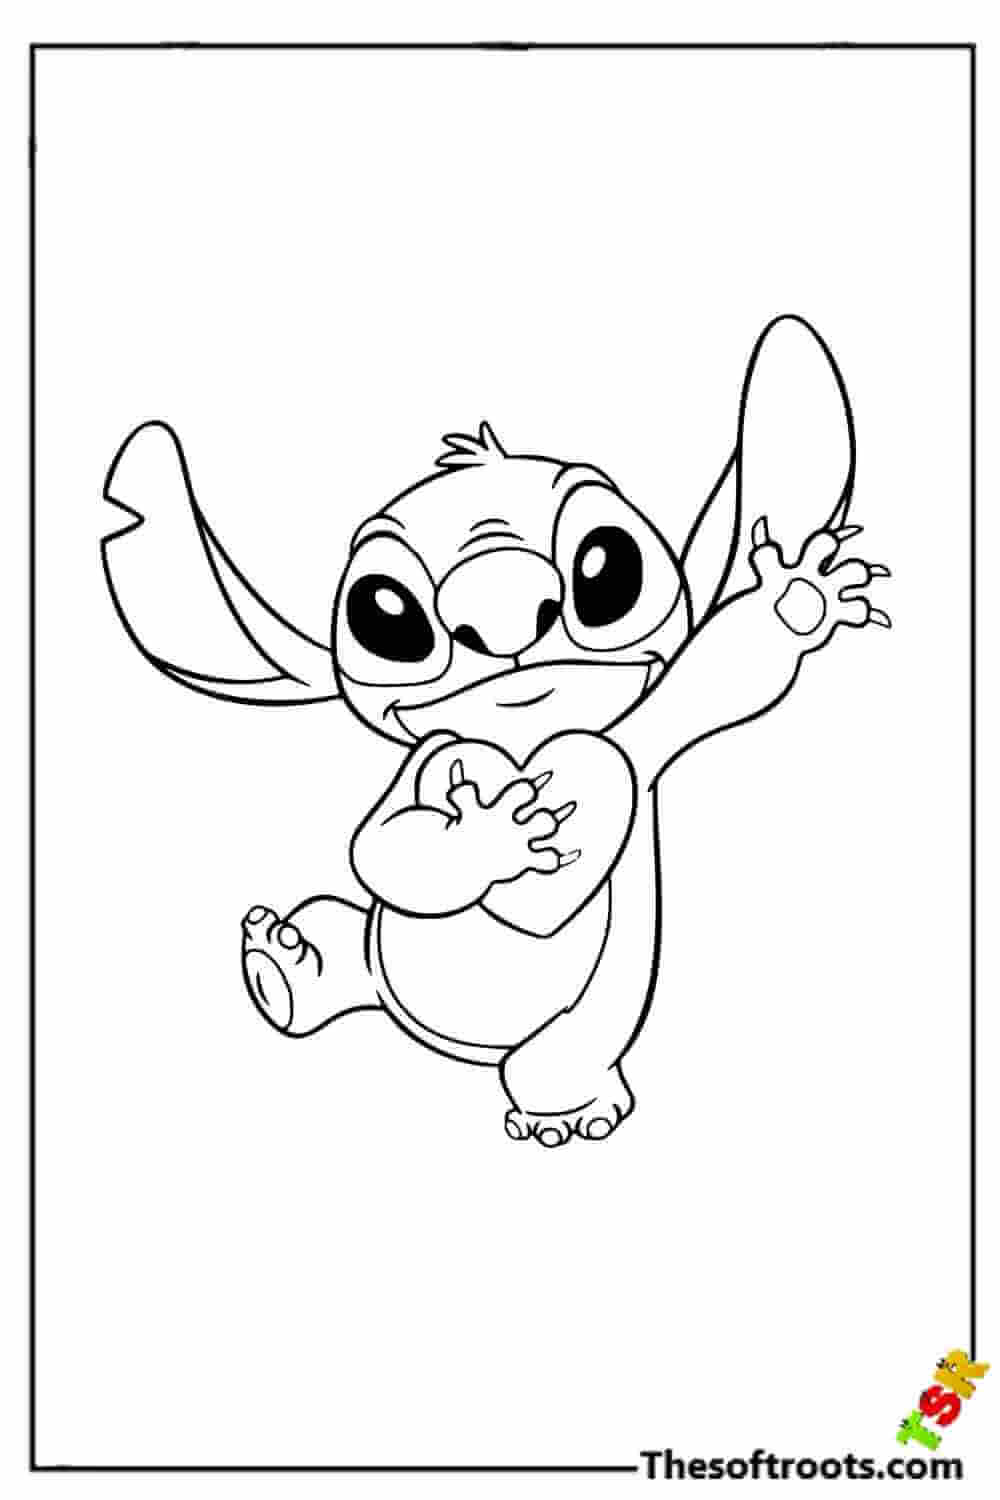 Disney Stitch coloring pages